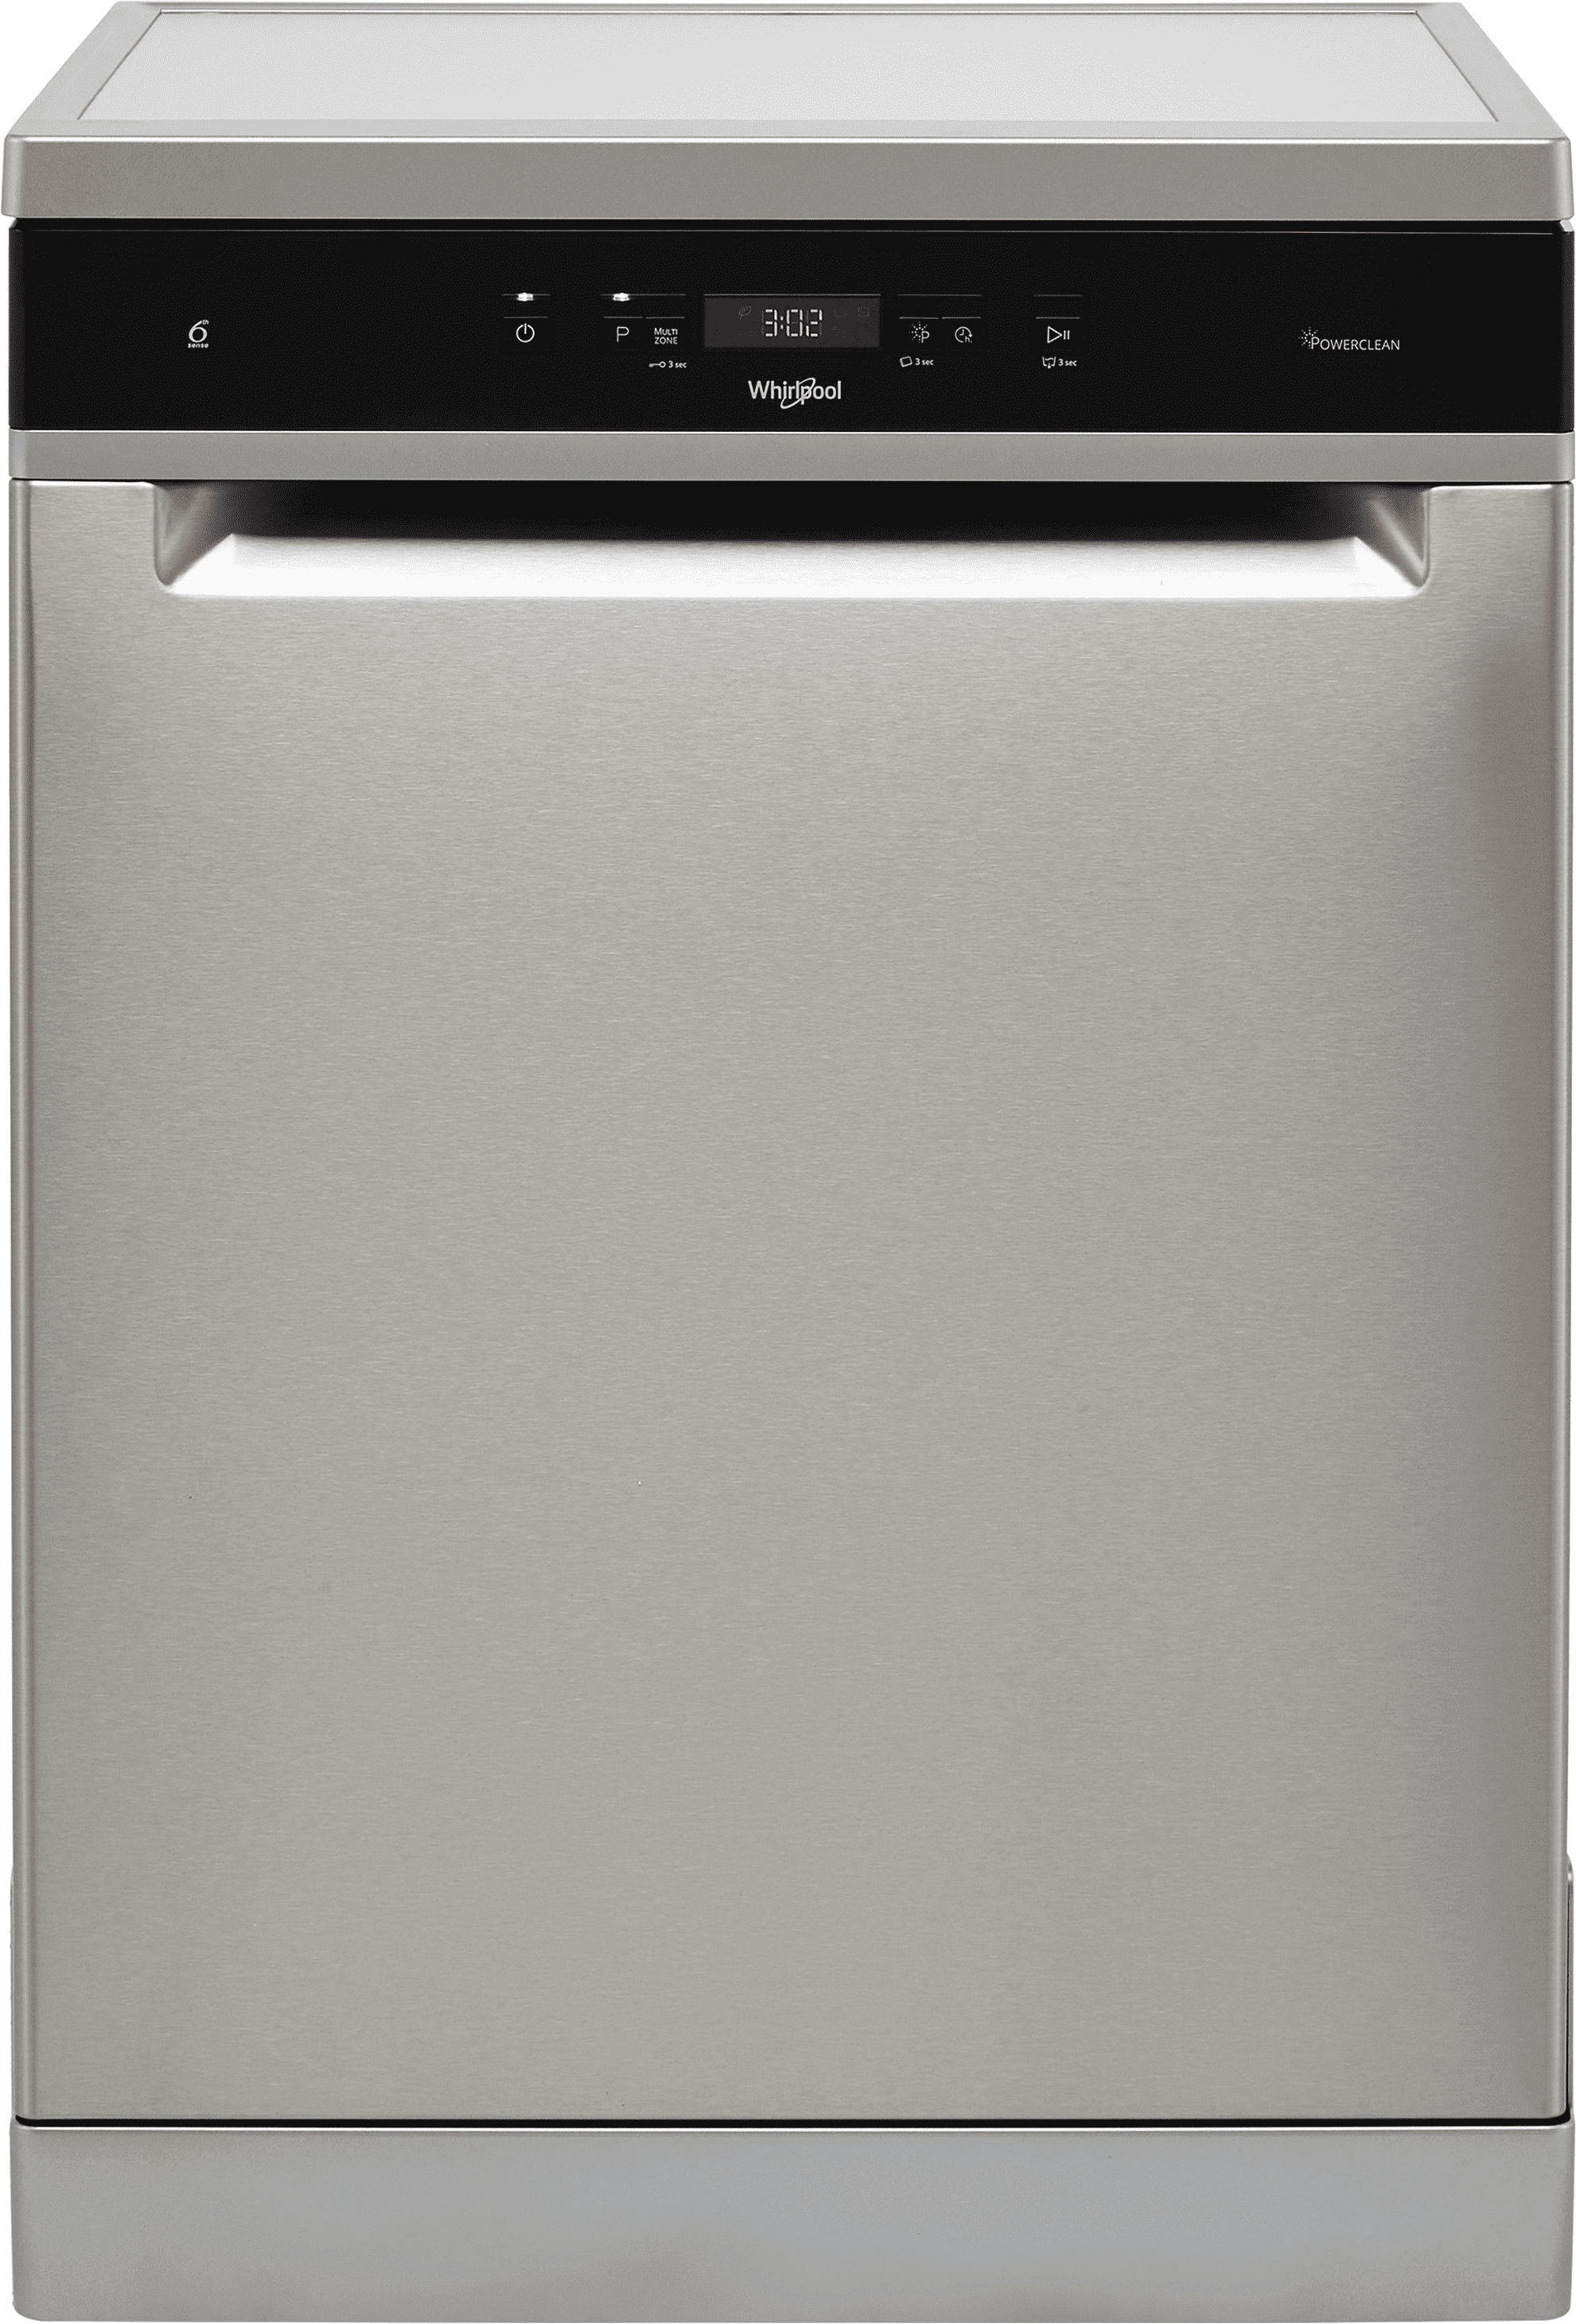 Whirlpool WFC3C33PFXUK Standard Dishwasher - Stainless Steel Effect - D Rated, Stainless Steel